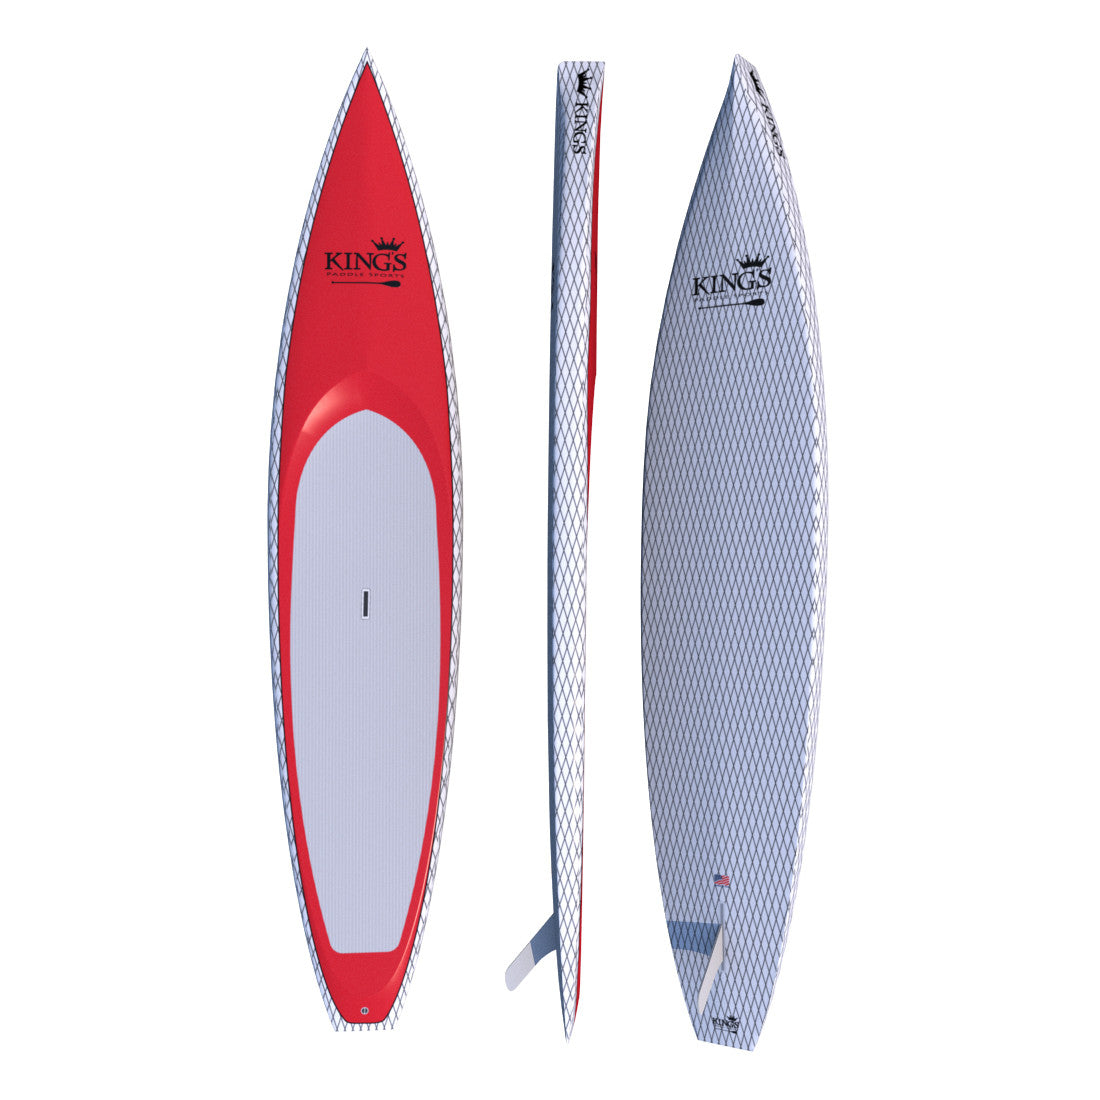 King's Racer X Stand Up Paddle Board